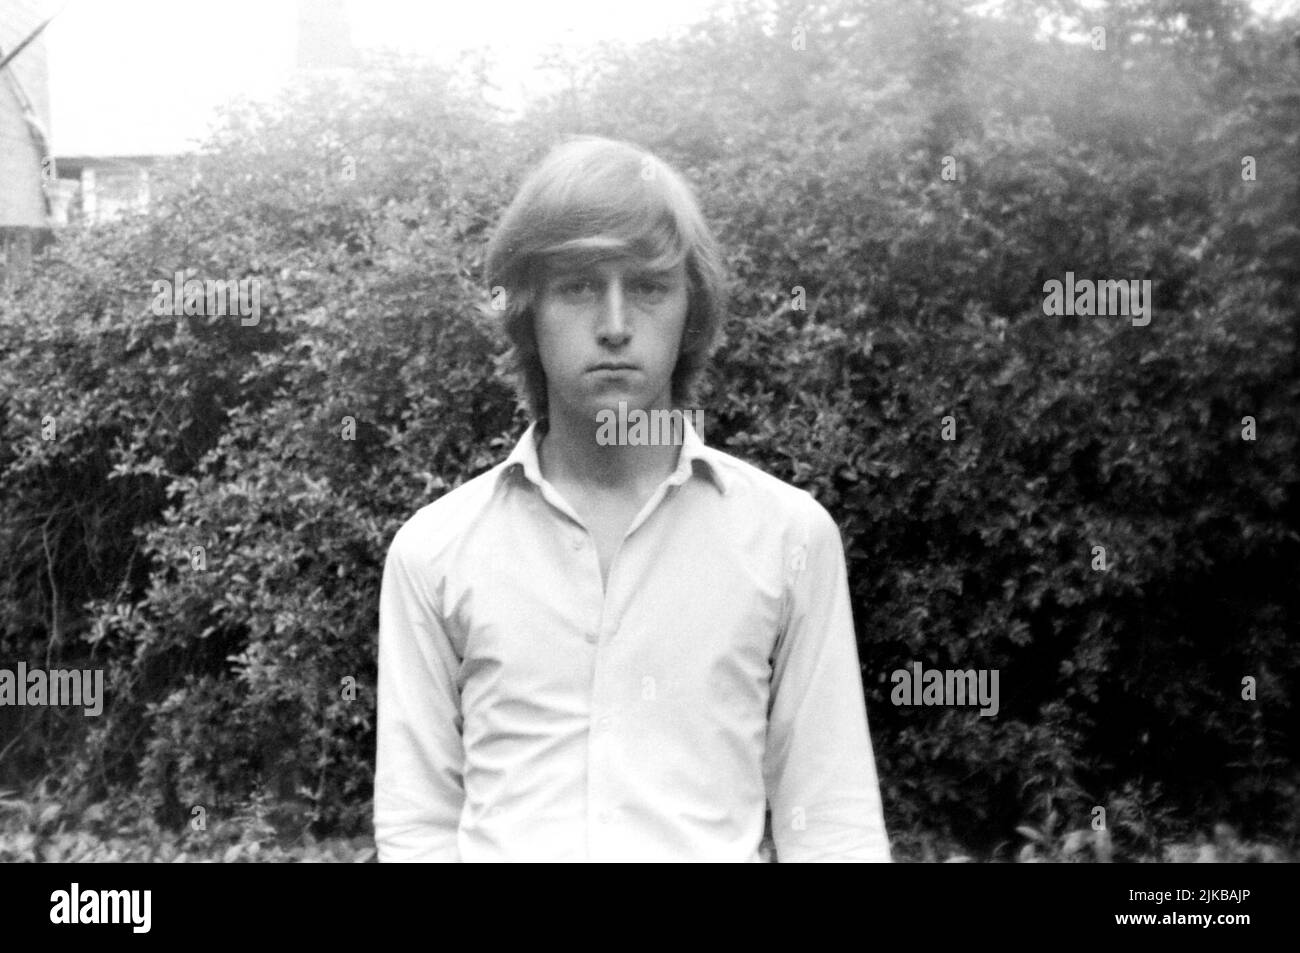 Portrait of a serious looking Caucasian teenage boy, aged 18, with long hair, taken in 1970 in a back garden with a hedge in the background. Taken in Blackpool, Lancashire, UK. Stock Photo